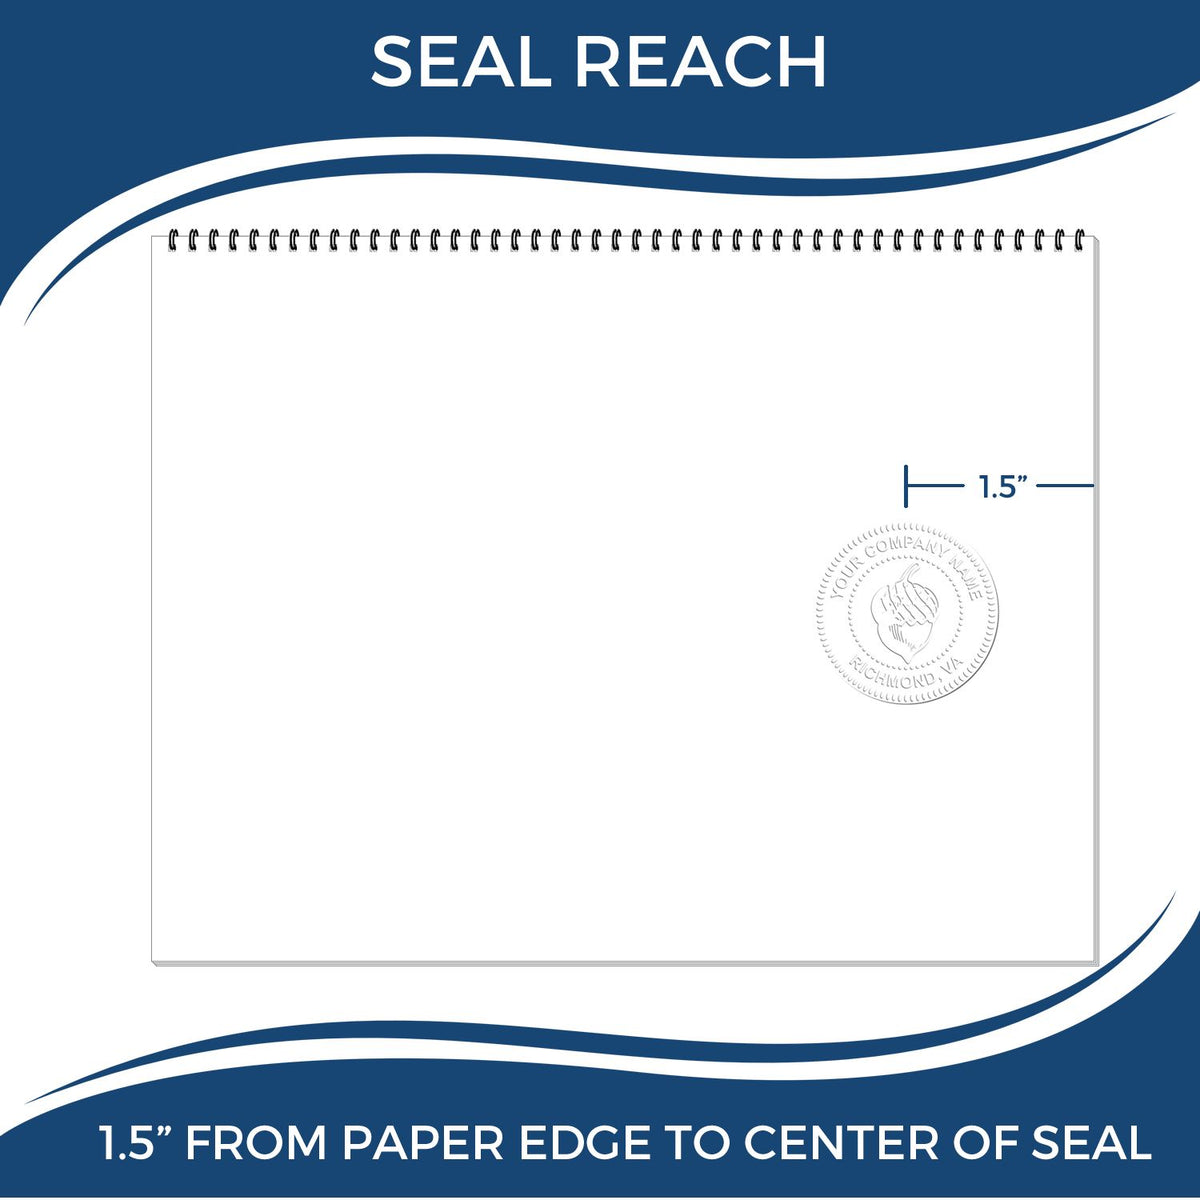 An infographic showing the seal reach which is represented by a ruler and a miniature seal image of the Hybrid Maryland Engineer Seal